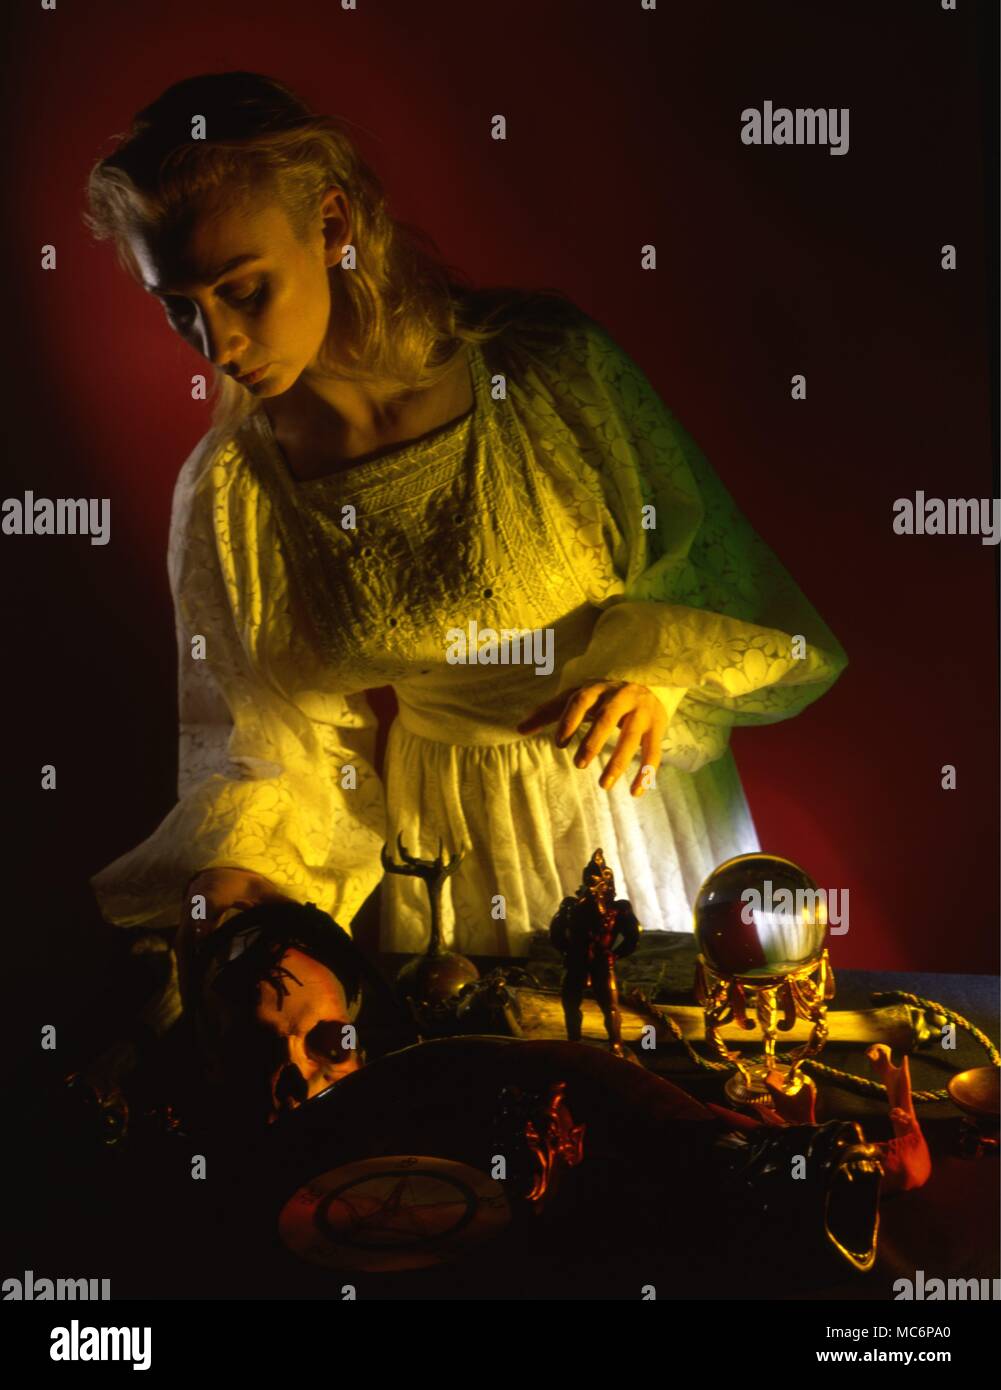 Young woman preparing for a wiccan ritual, arranging ritual objects, which include such things as a human skull, shaman trumpet, incense burners, and so on. Stock Photo